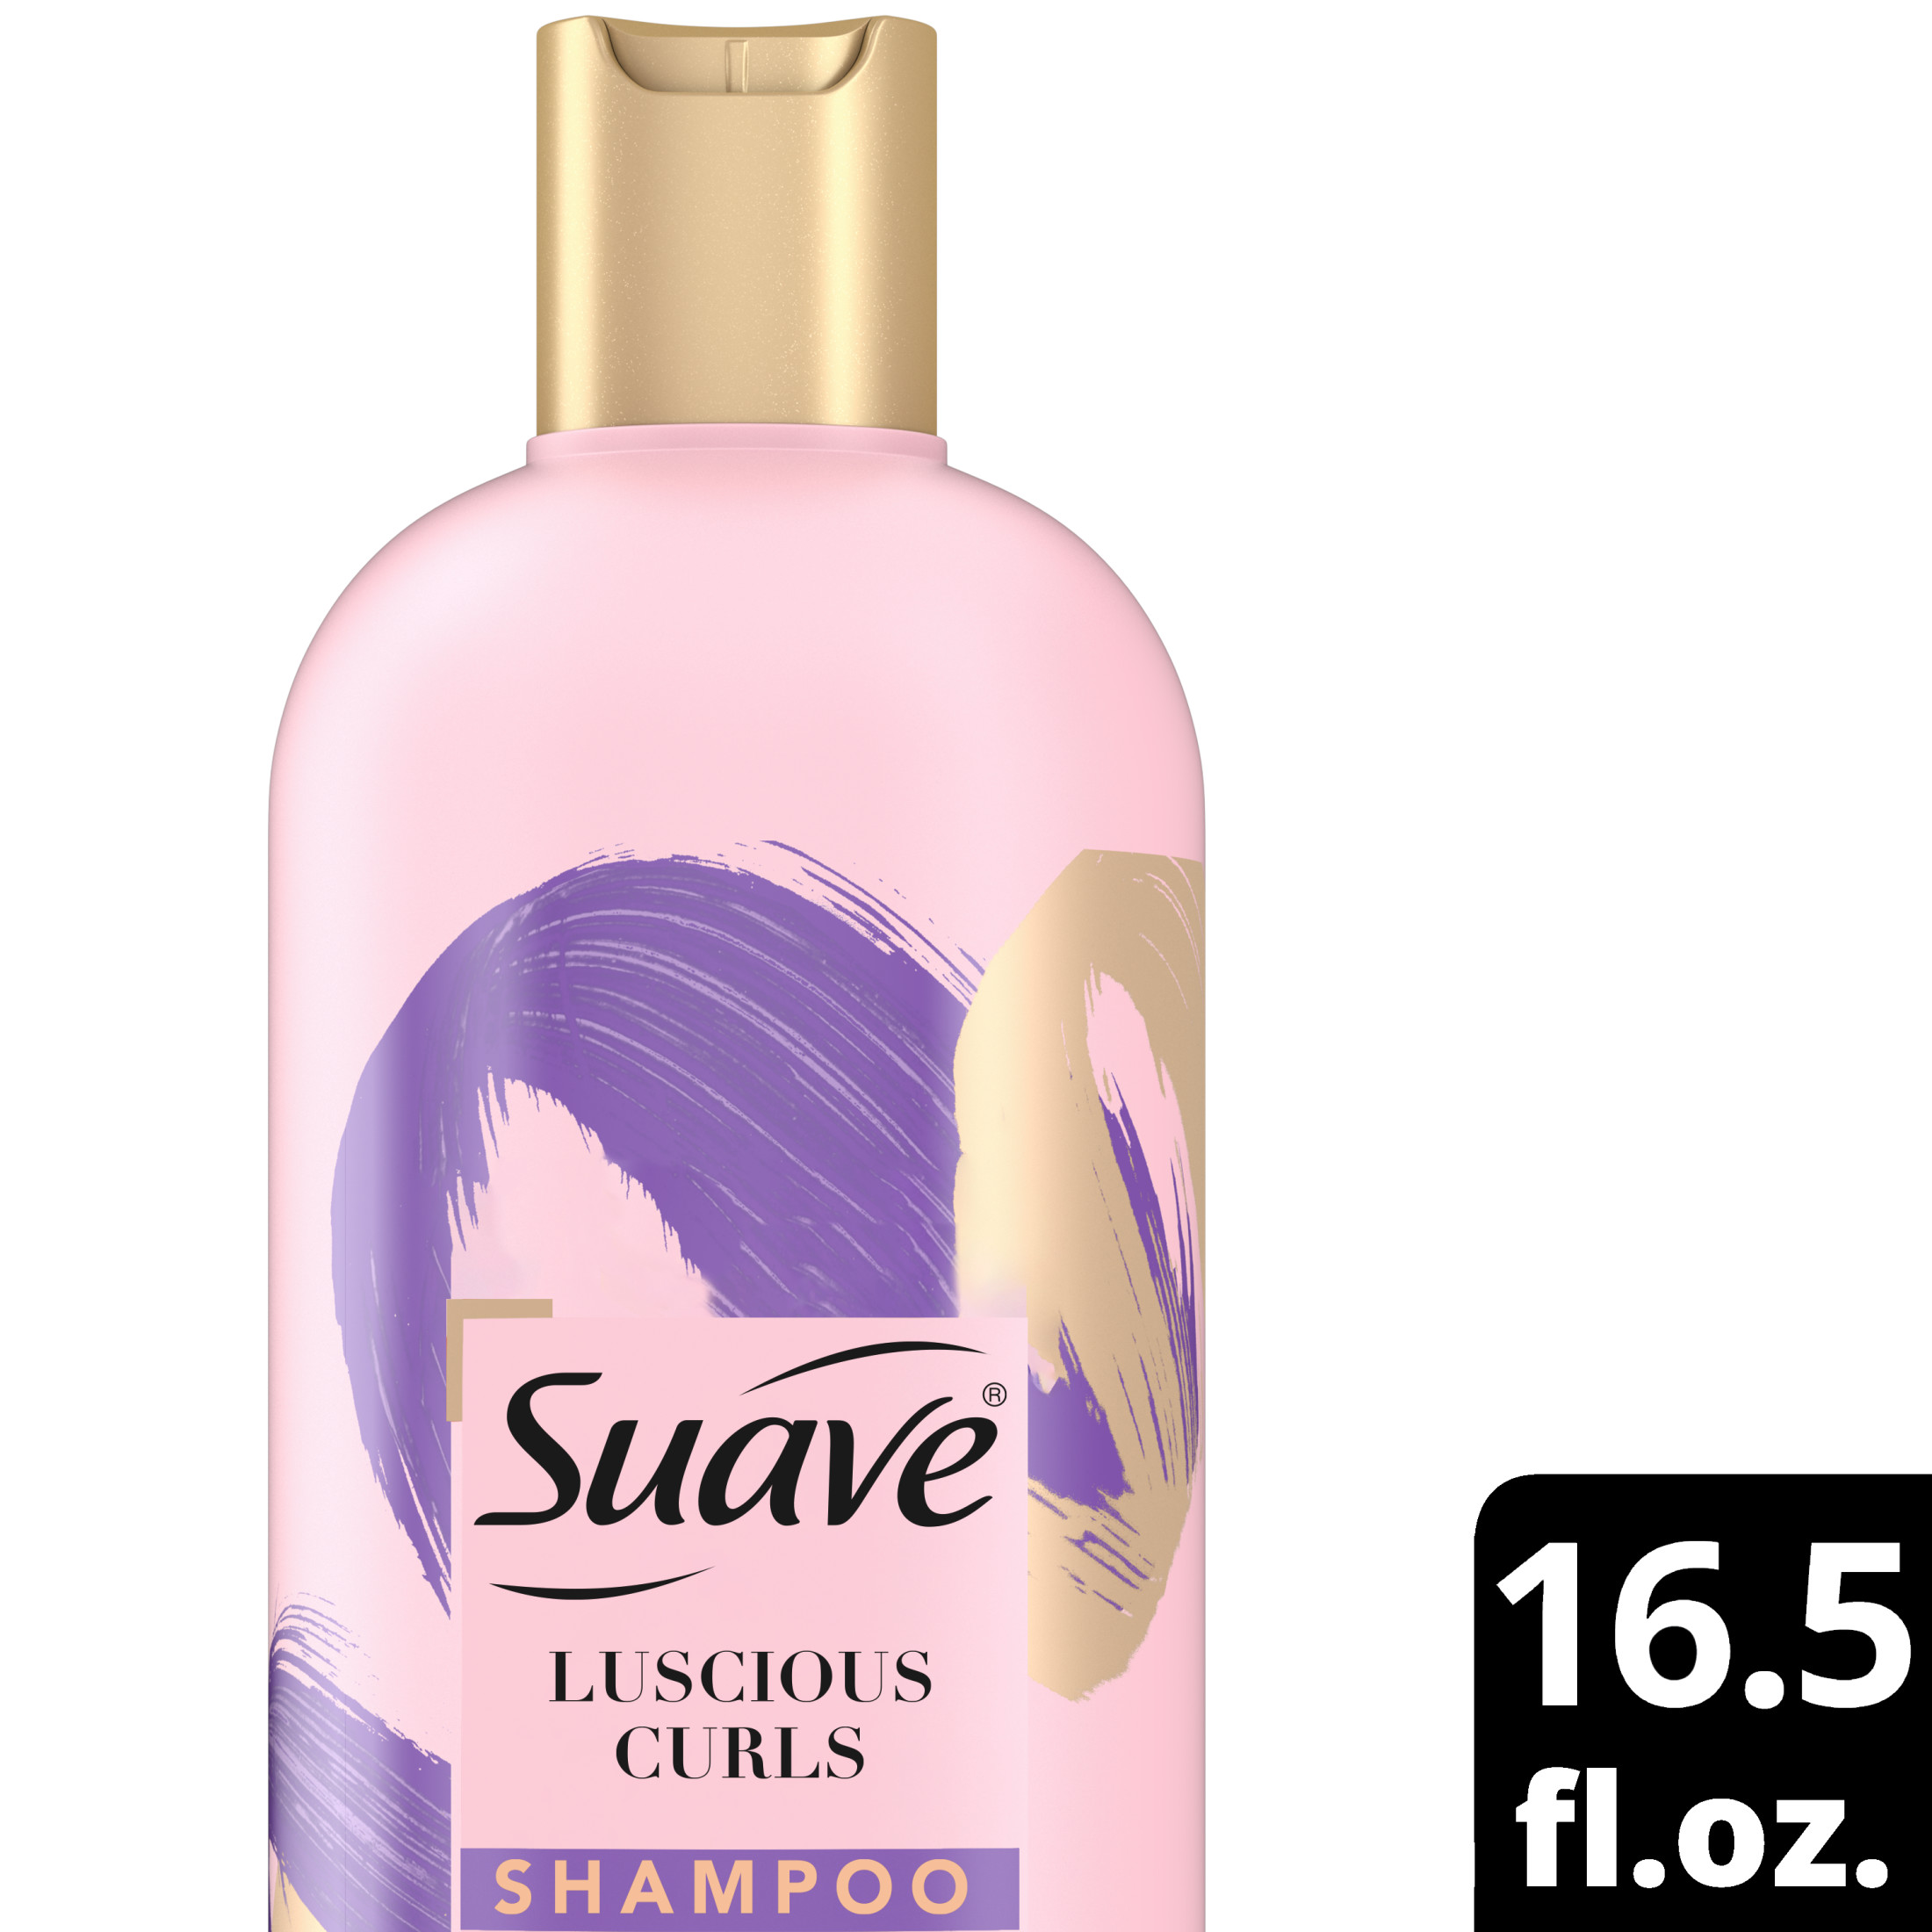 Suave Pink Luscious Curls Curl Defining Shampoo with Amino Acid Complex, 16.5 oz - image 3 of 12